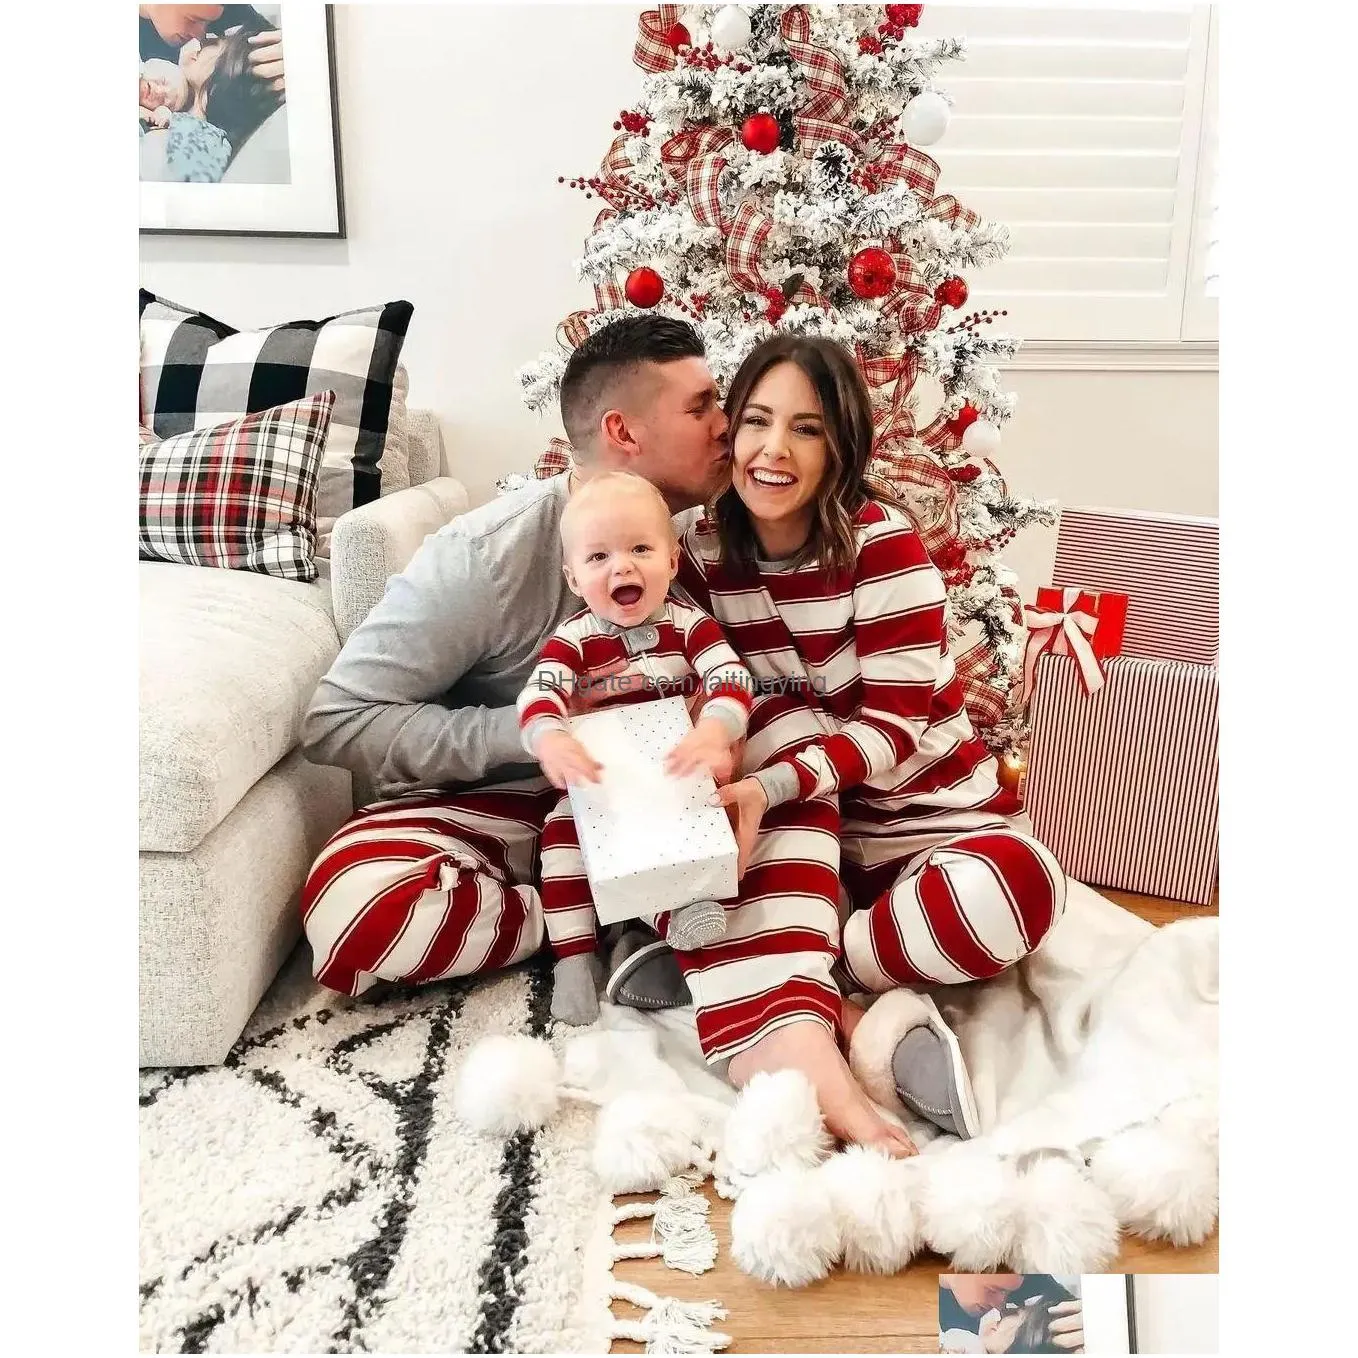 family matching outfits winter christmas pajamas set striped print mom daughter dad son baby clothes soft loose sleepwear xmas look